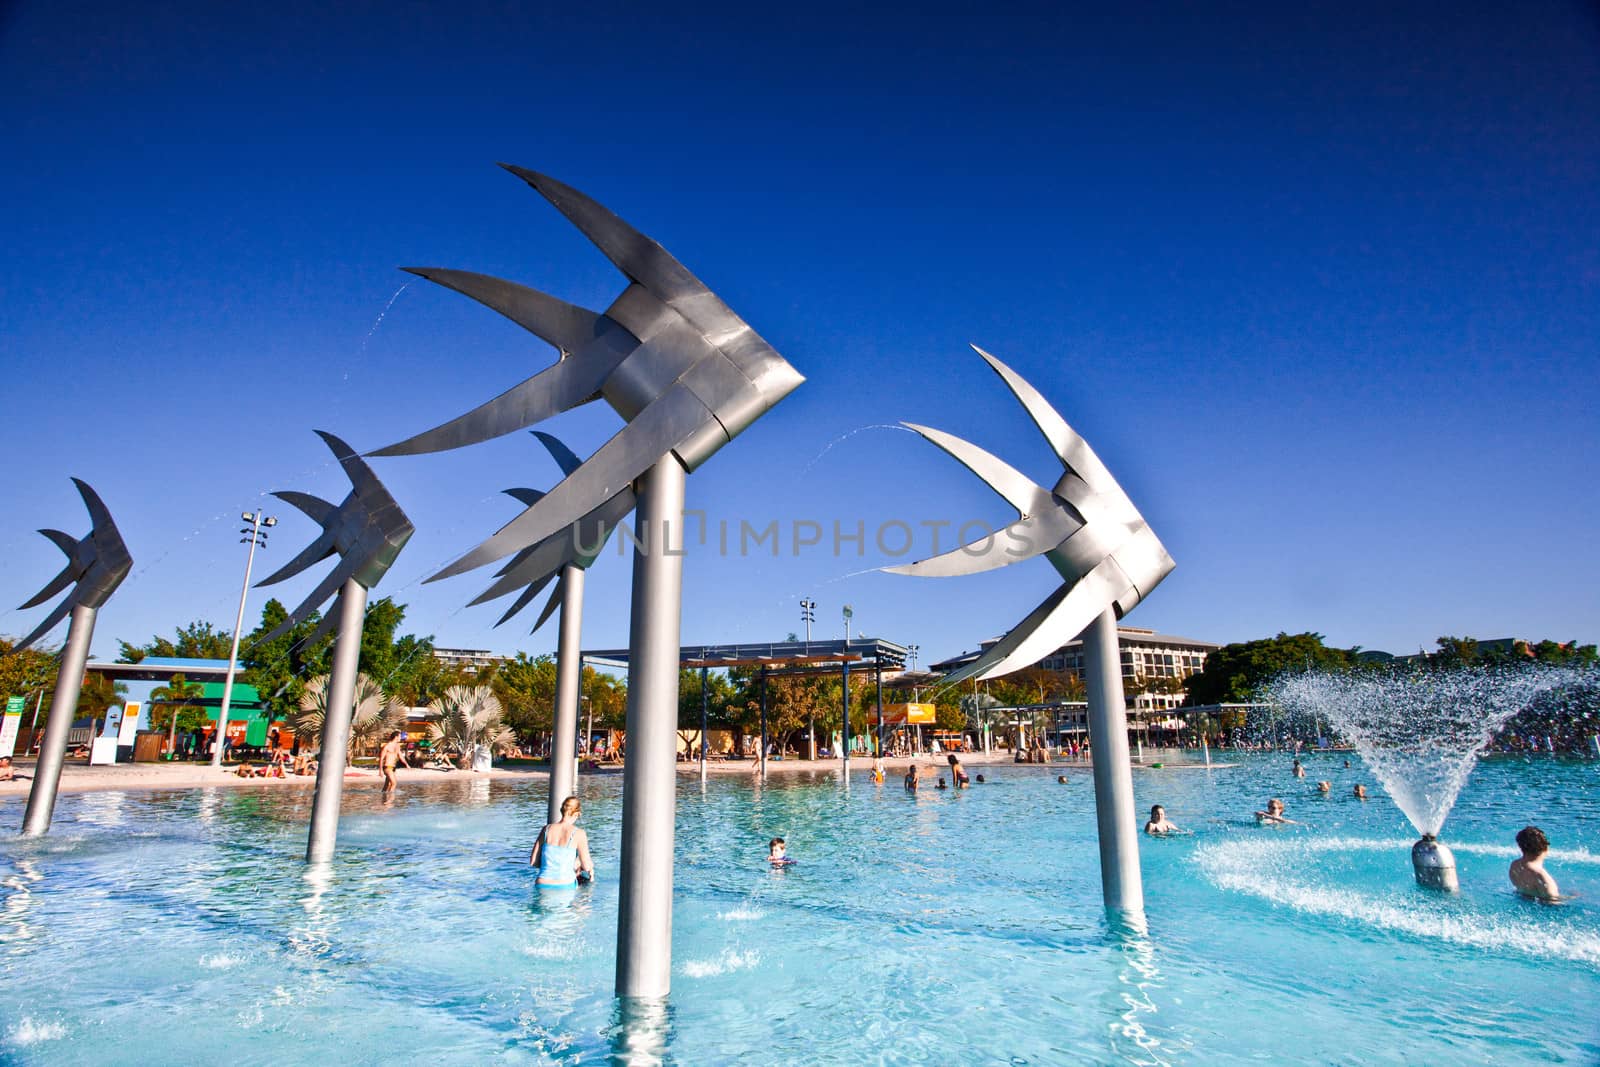 Swimming lagoon and steel Fish Sculpture in Cairns, Australia with people enjoying the summer sun frolicking in the water